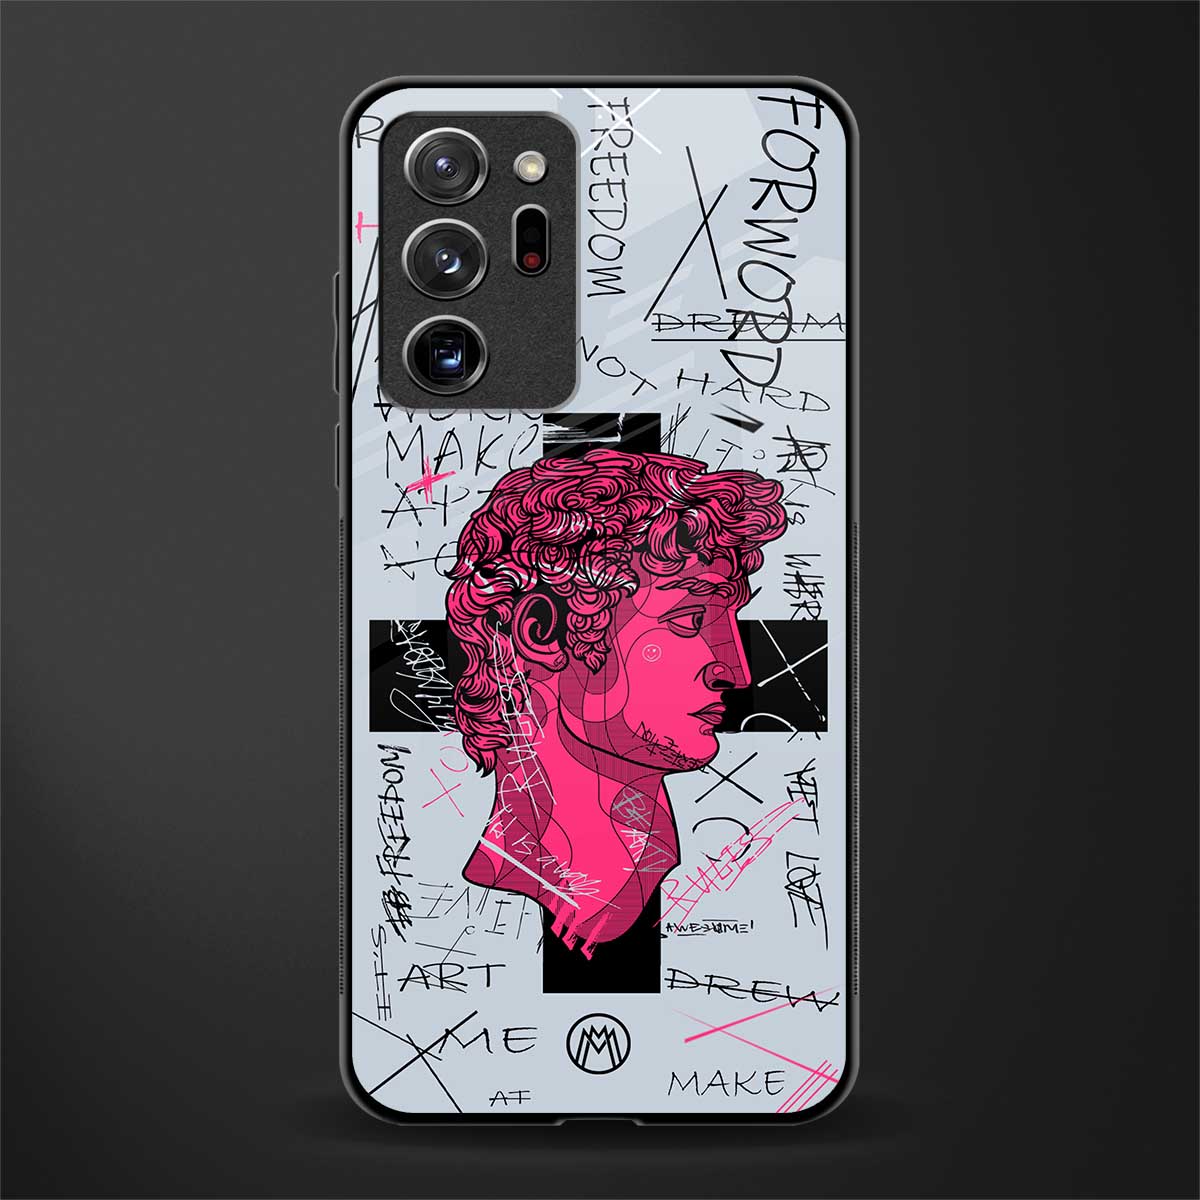 lost in reality david glass case for samsung galaxy note 20 ultra 5g image